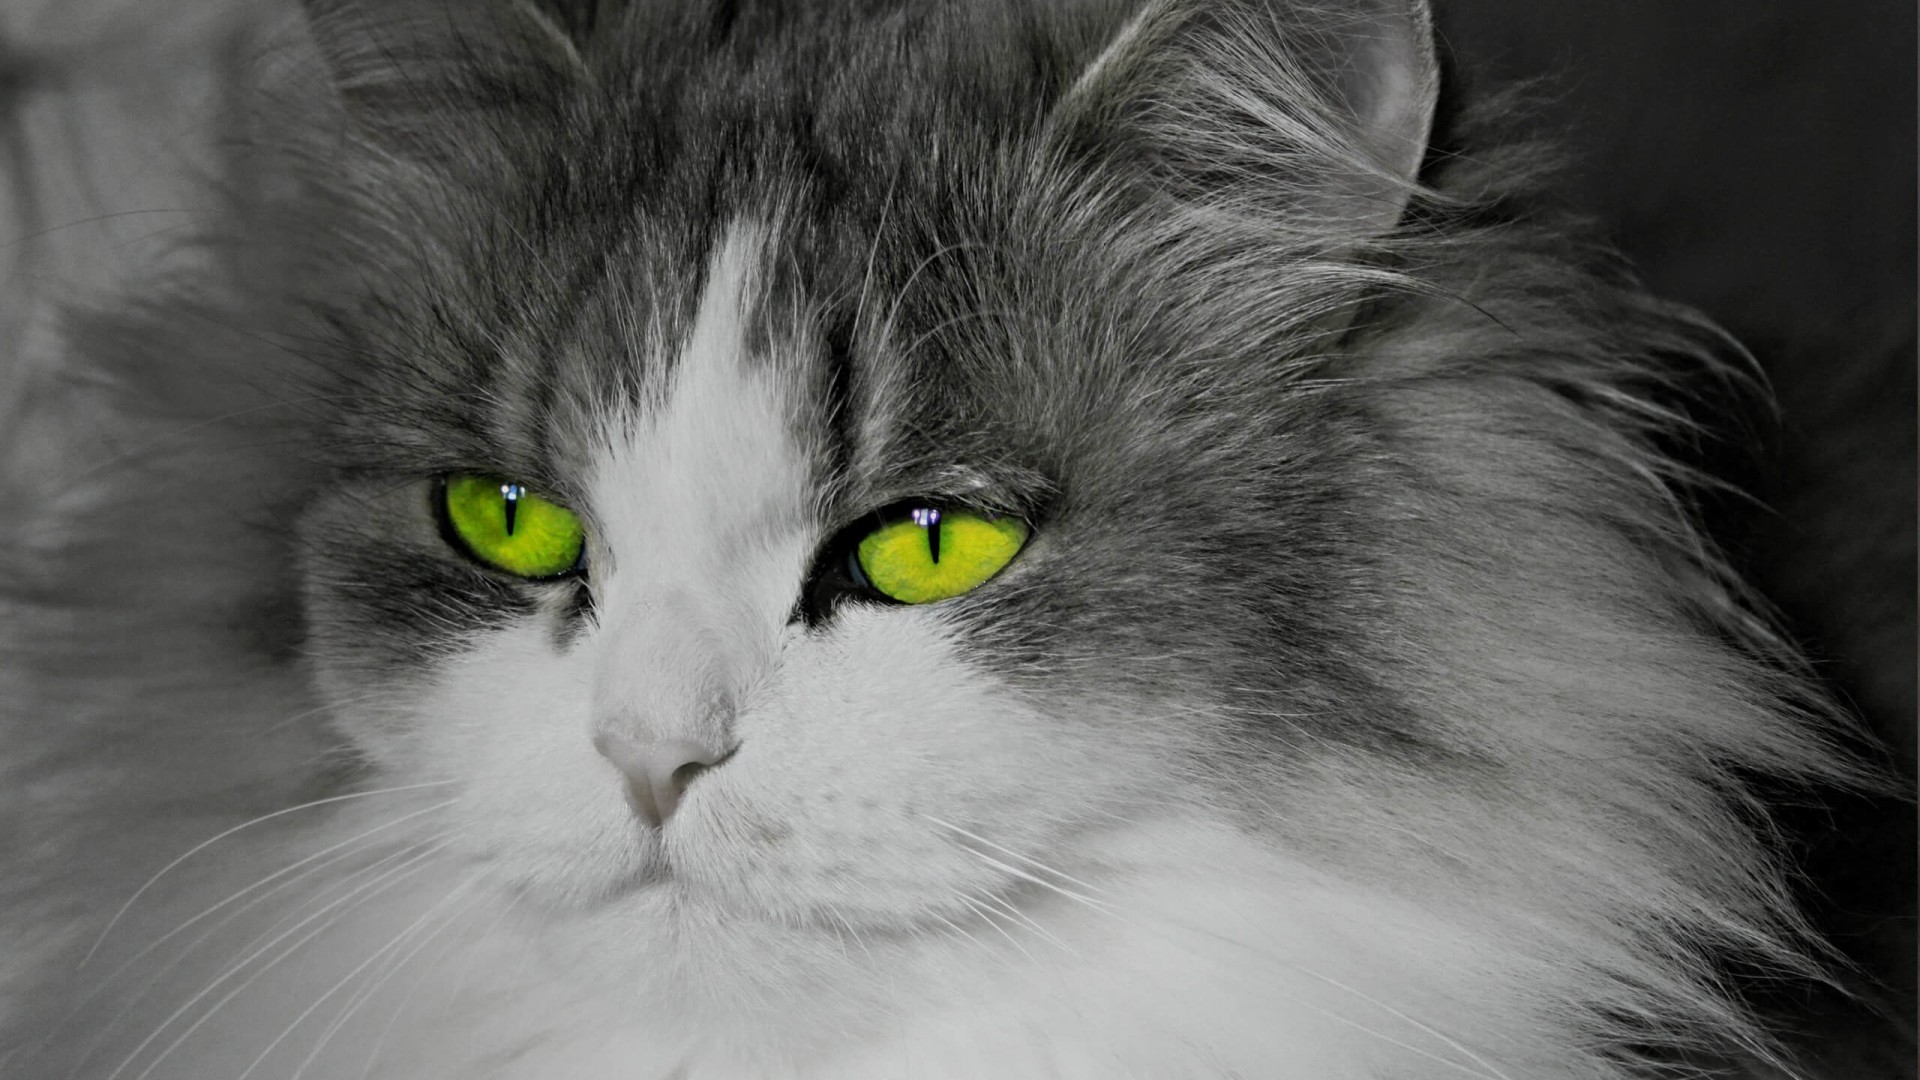 Cat With Stunningly Green Eyes Wallpaper for Desktop 1920x1080